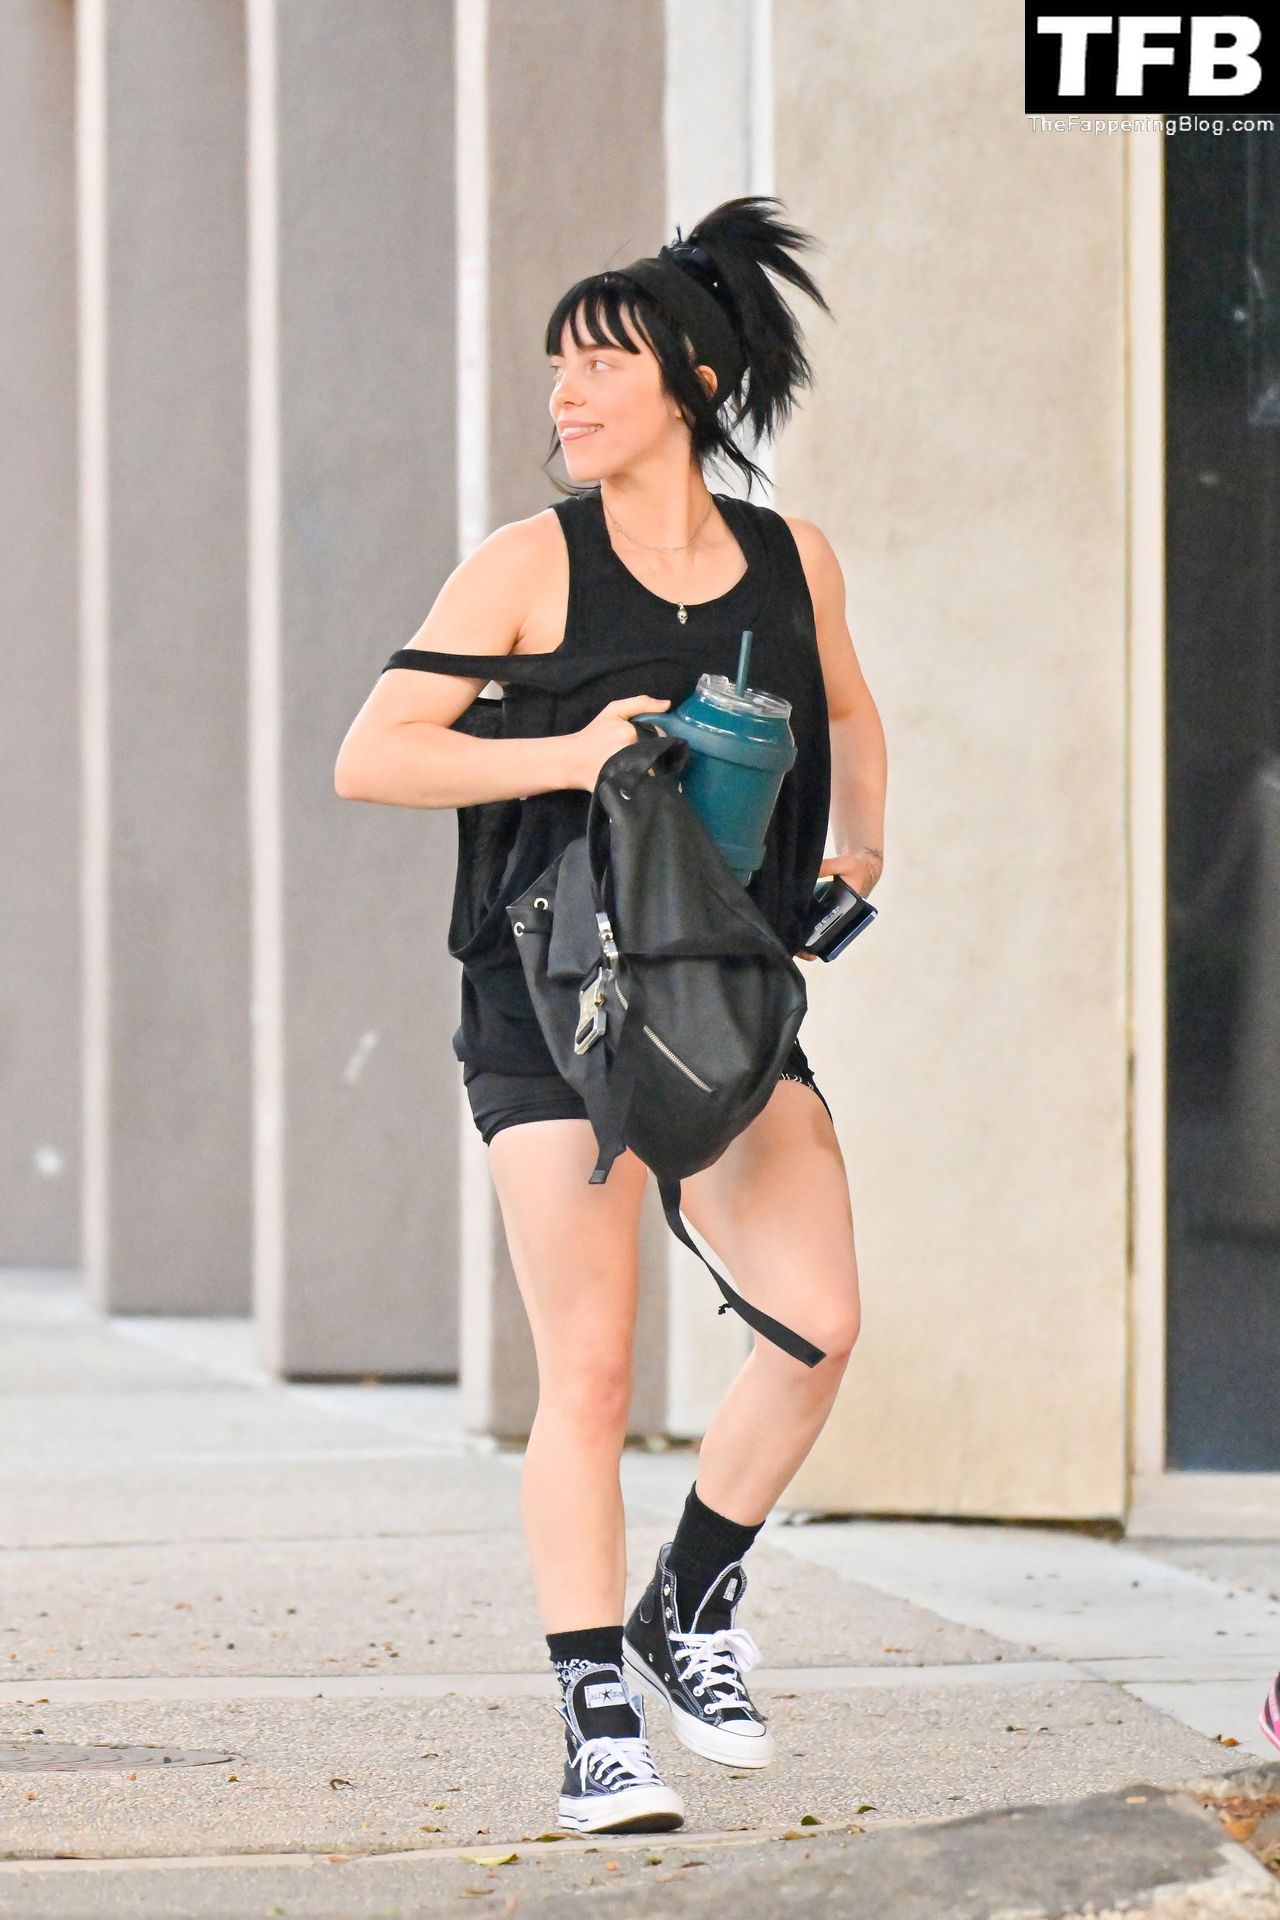 Billie Eilish Sexy The Fappening Blog 18 - Billie Eilish Keeps Up Her Fitness Regime, Stepping Out For Another Workout in Studio City (26 Photos)